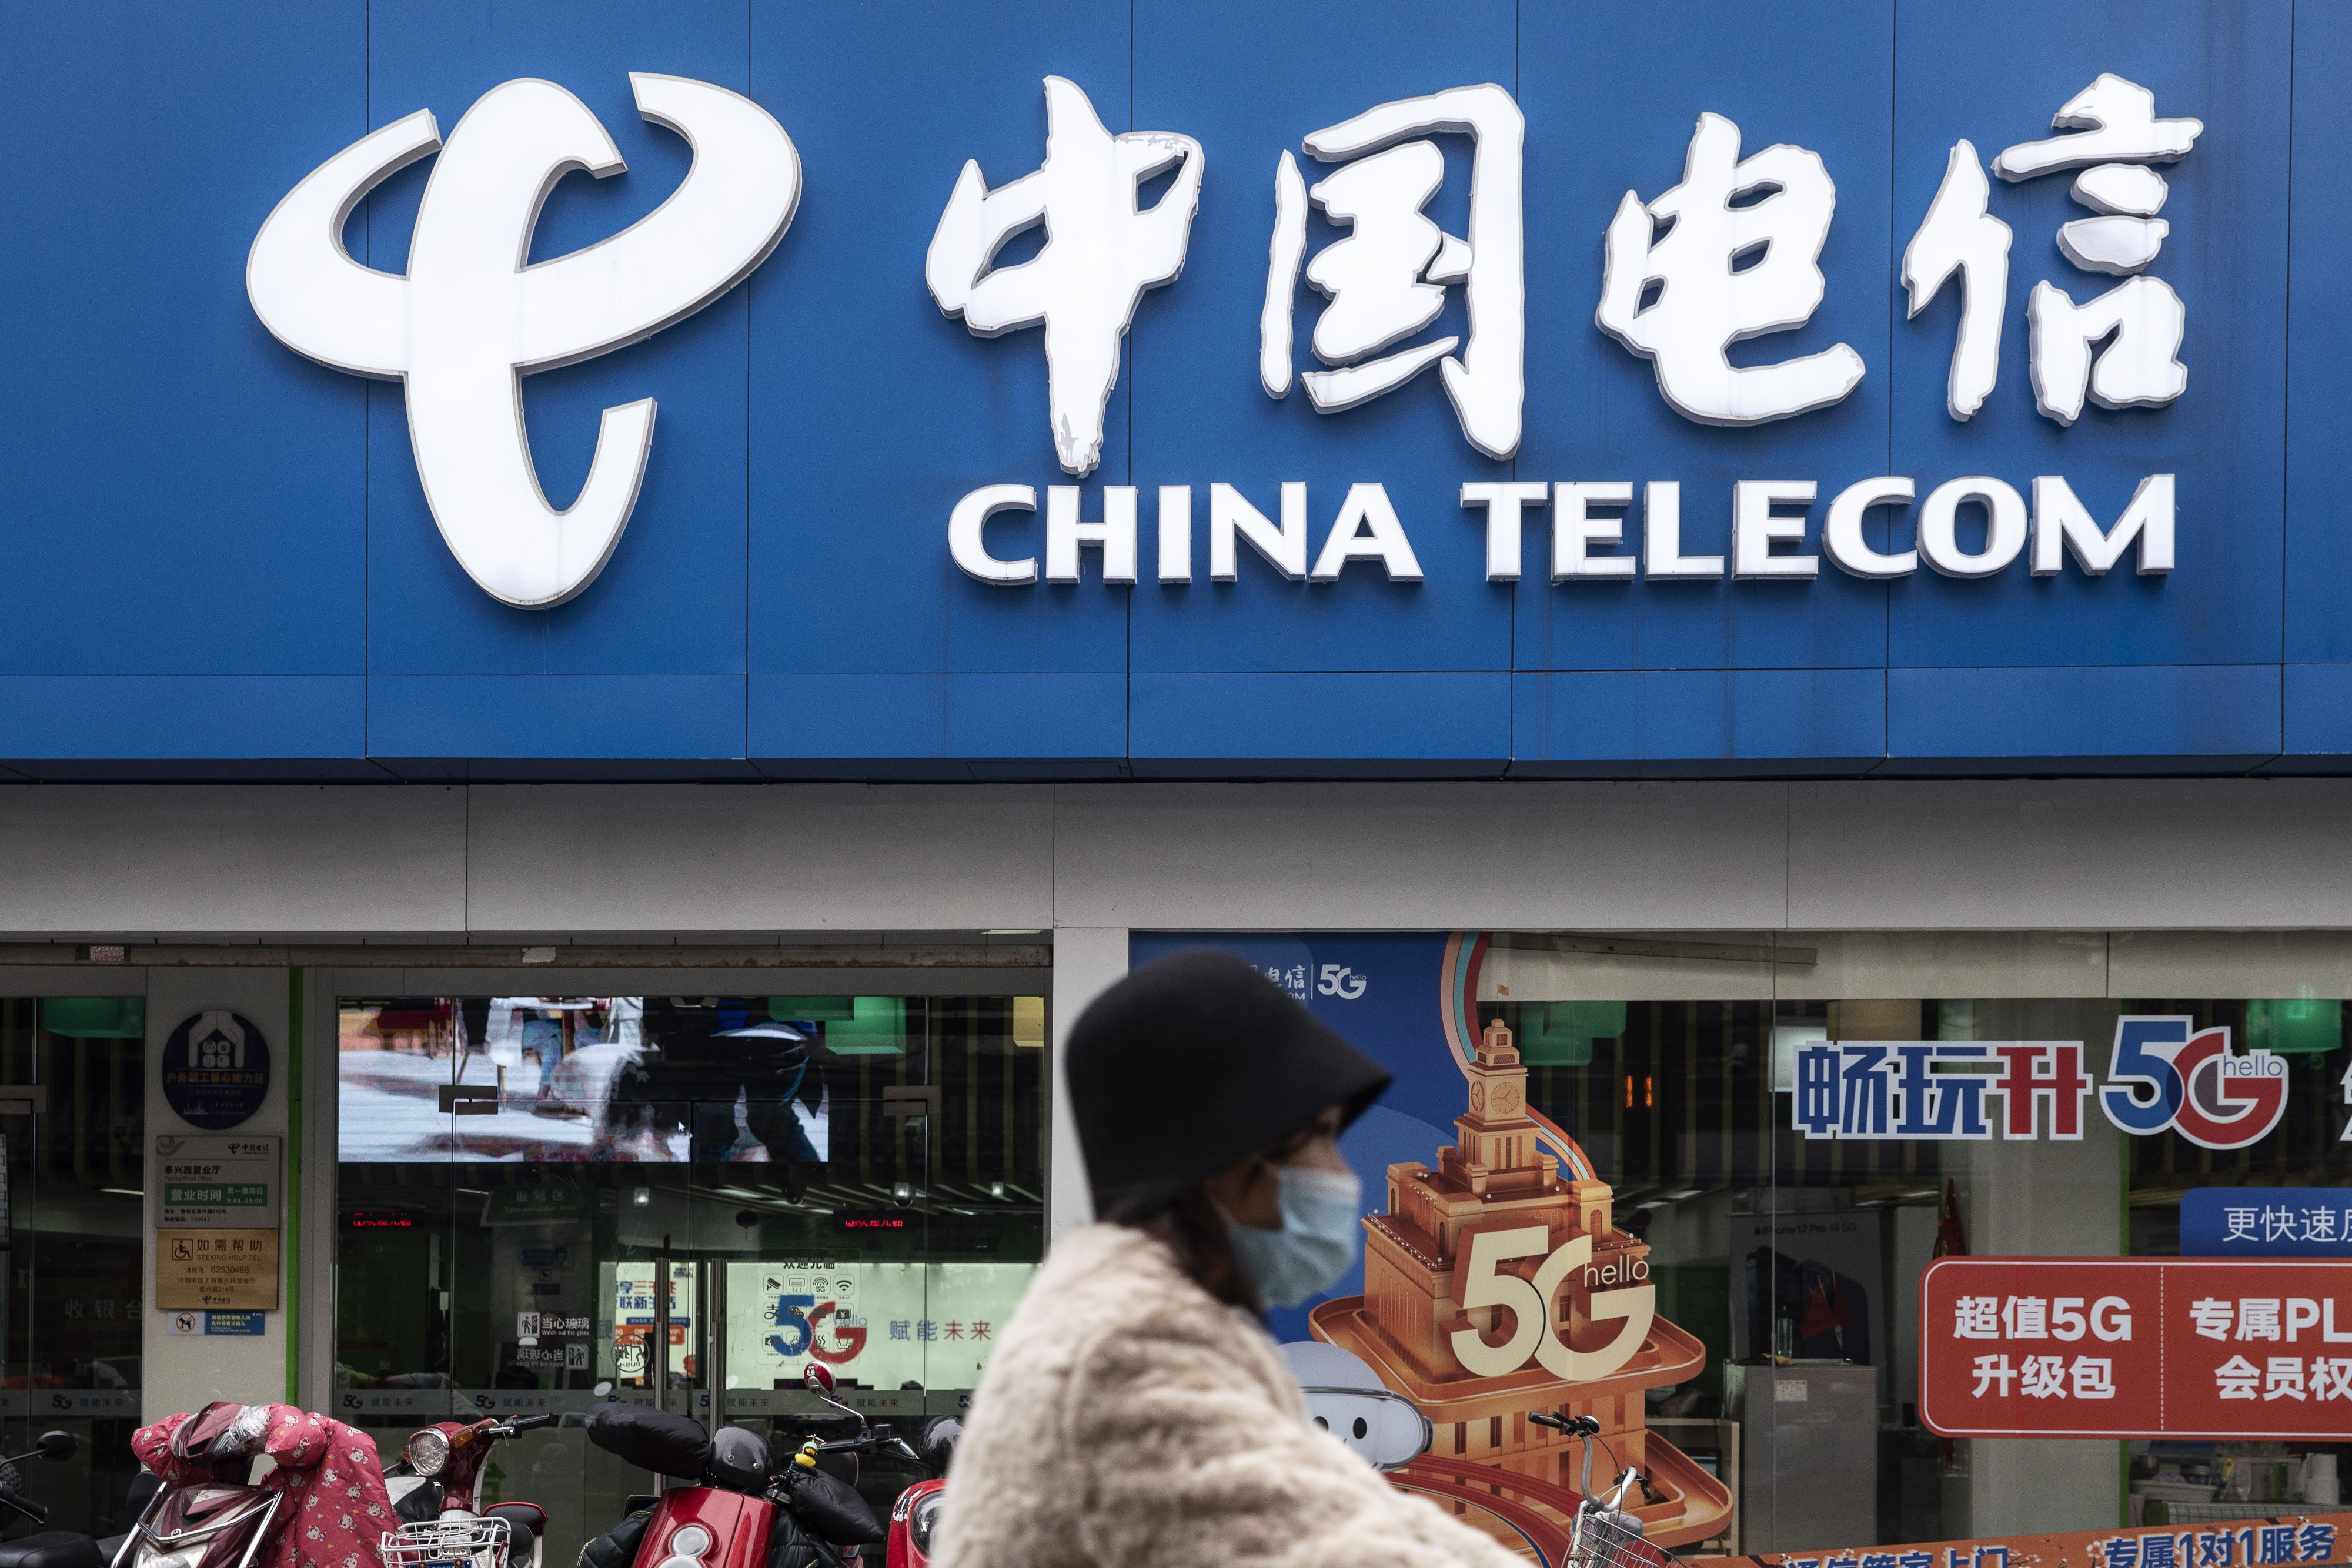 A motorist rides past a China Telecom store in Shanghai in January 2021. Photo: Bloomberg